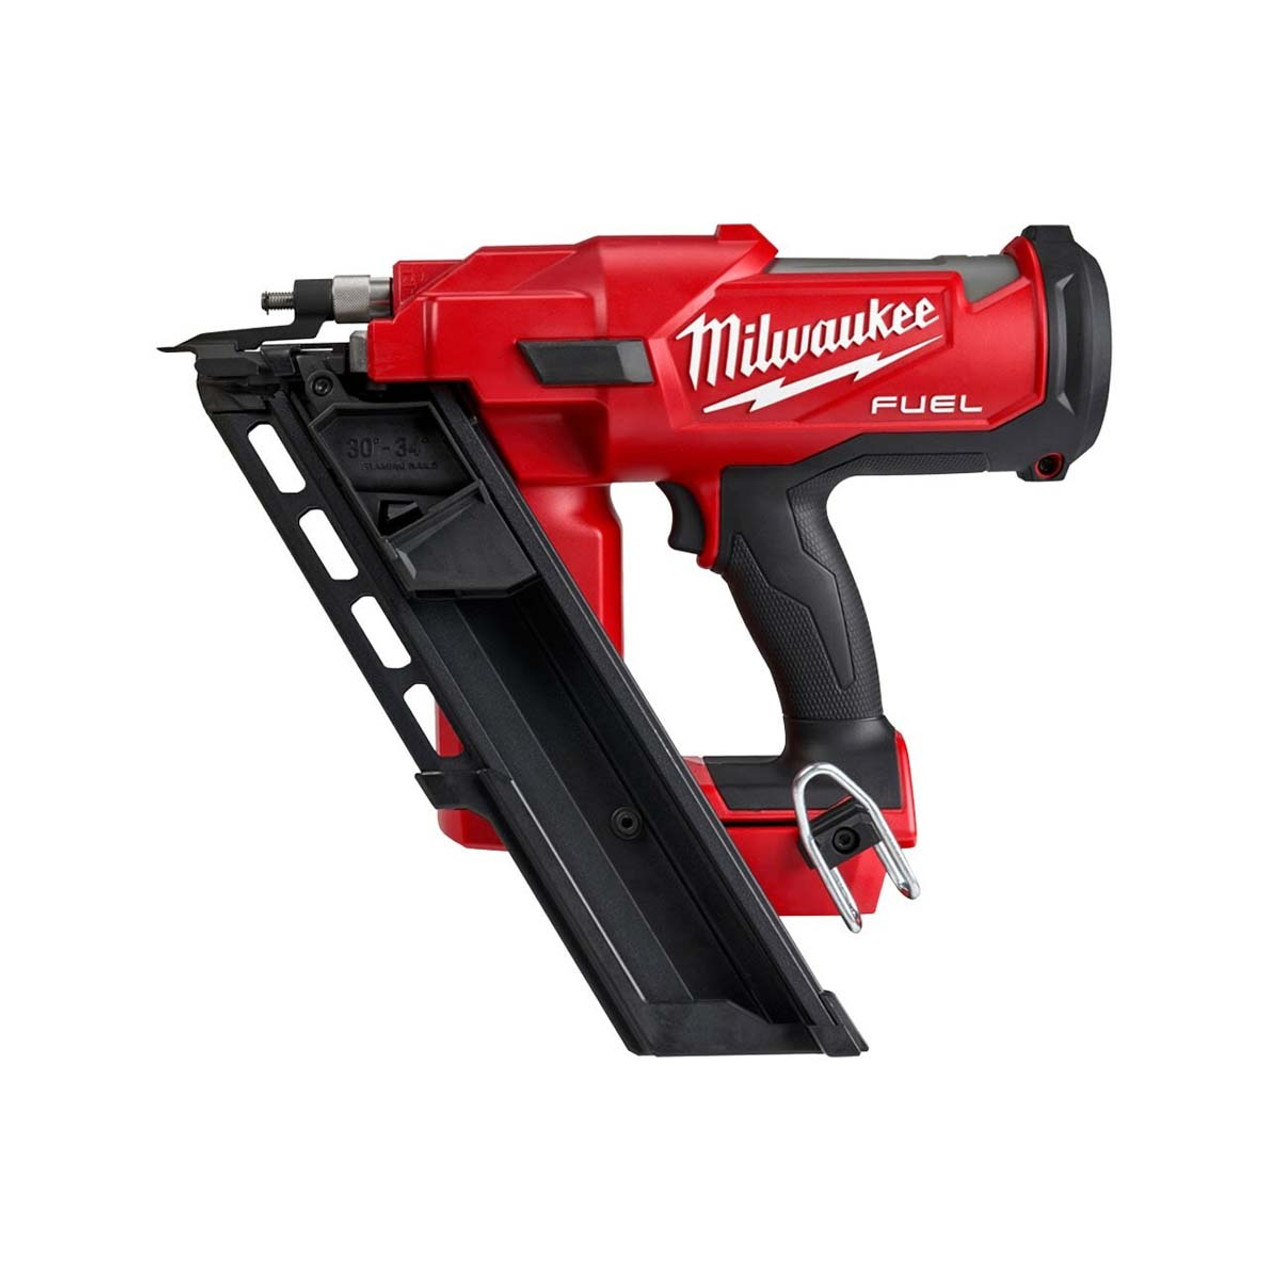 Milwaukee 18V Fuel First Fix Angled Nail Gun (Body Only)